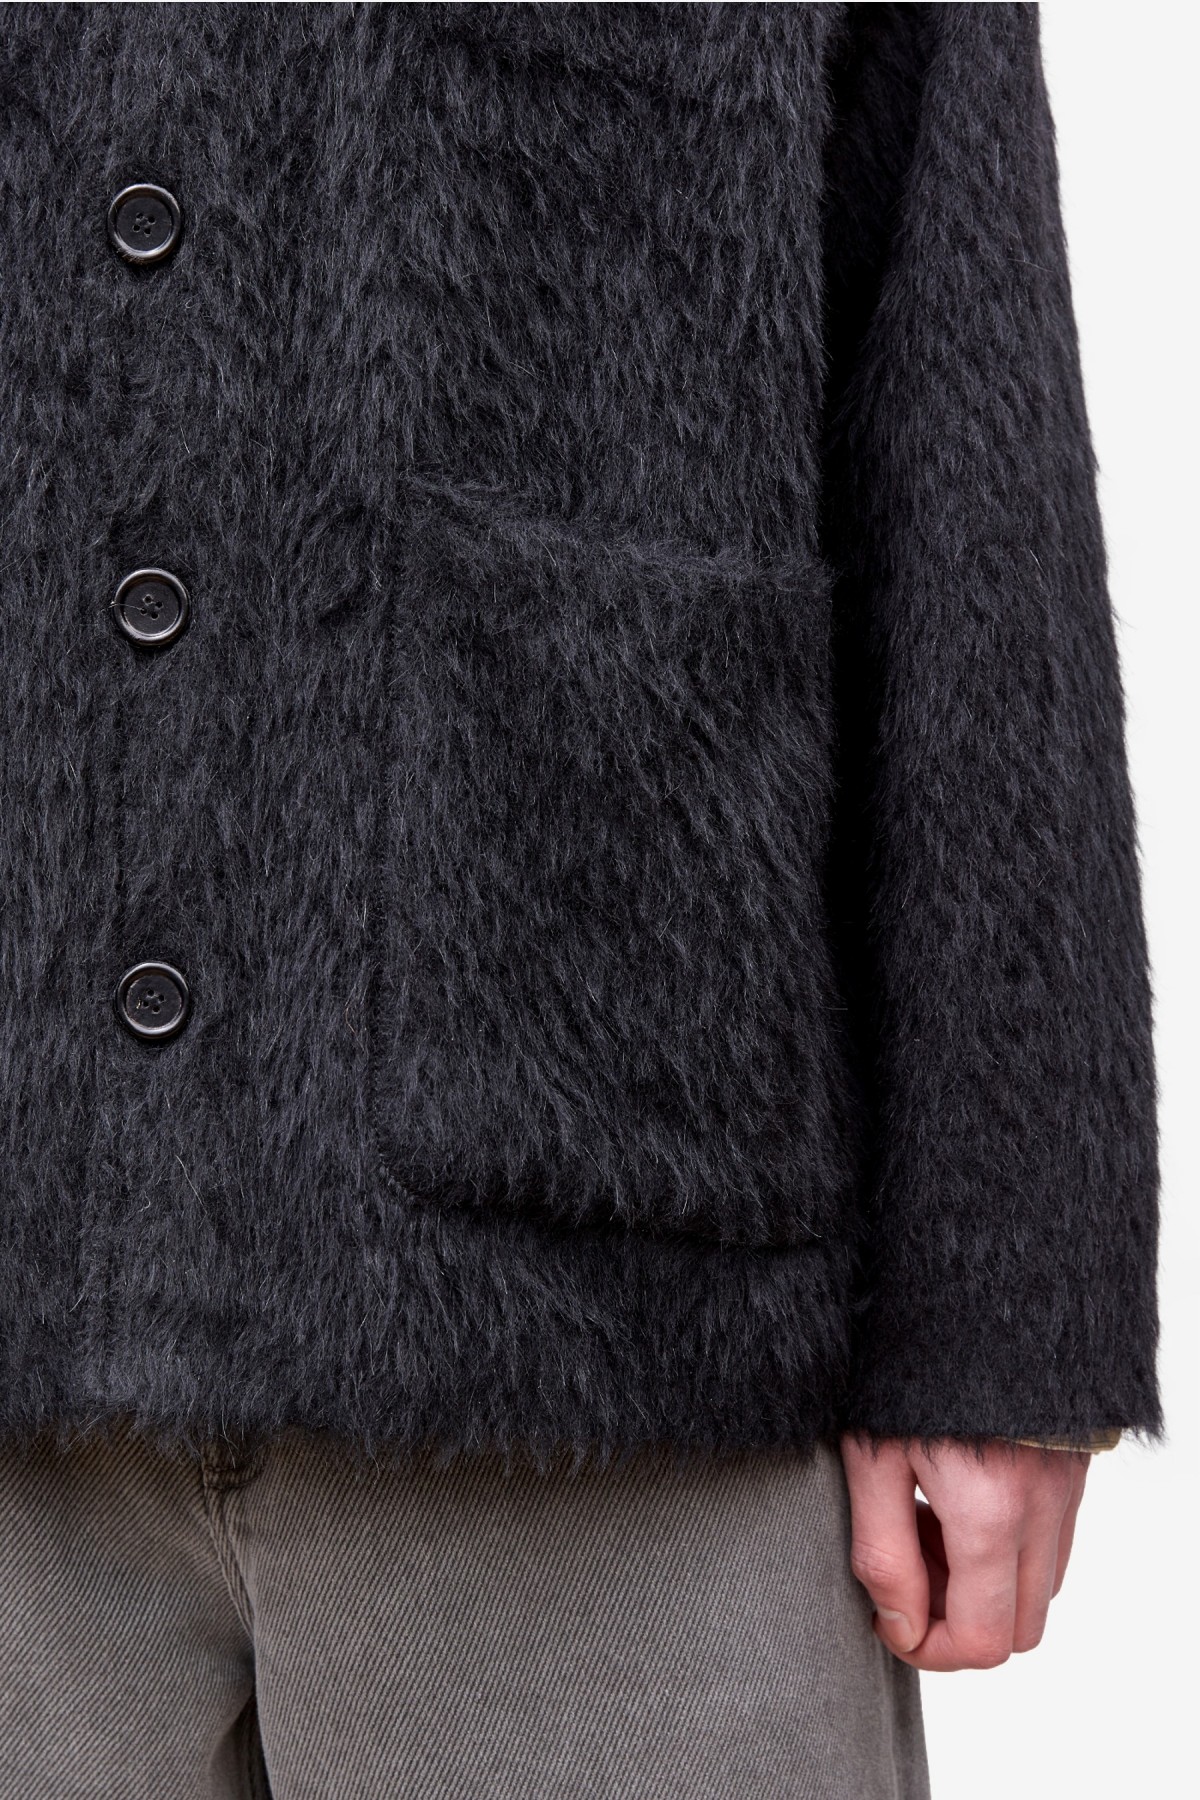 Our Legacy Cardigan in Black Mohair